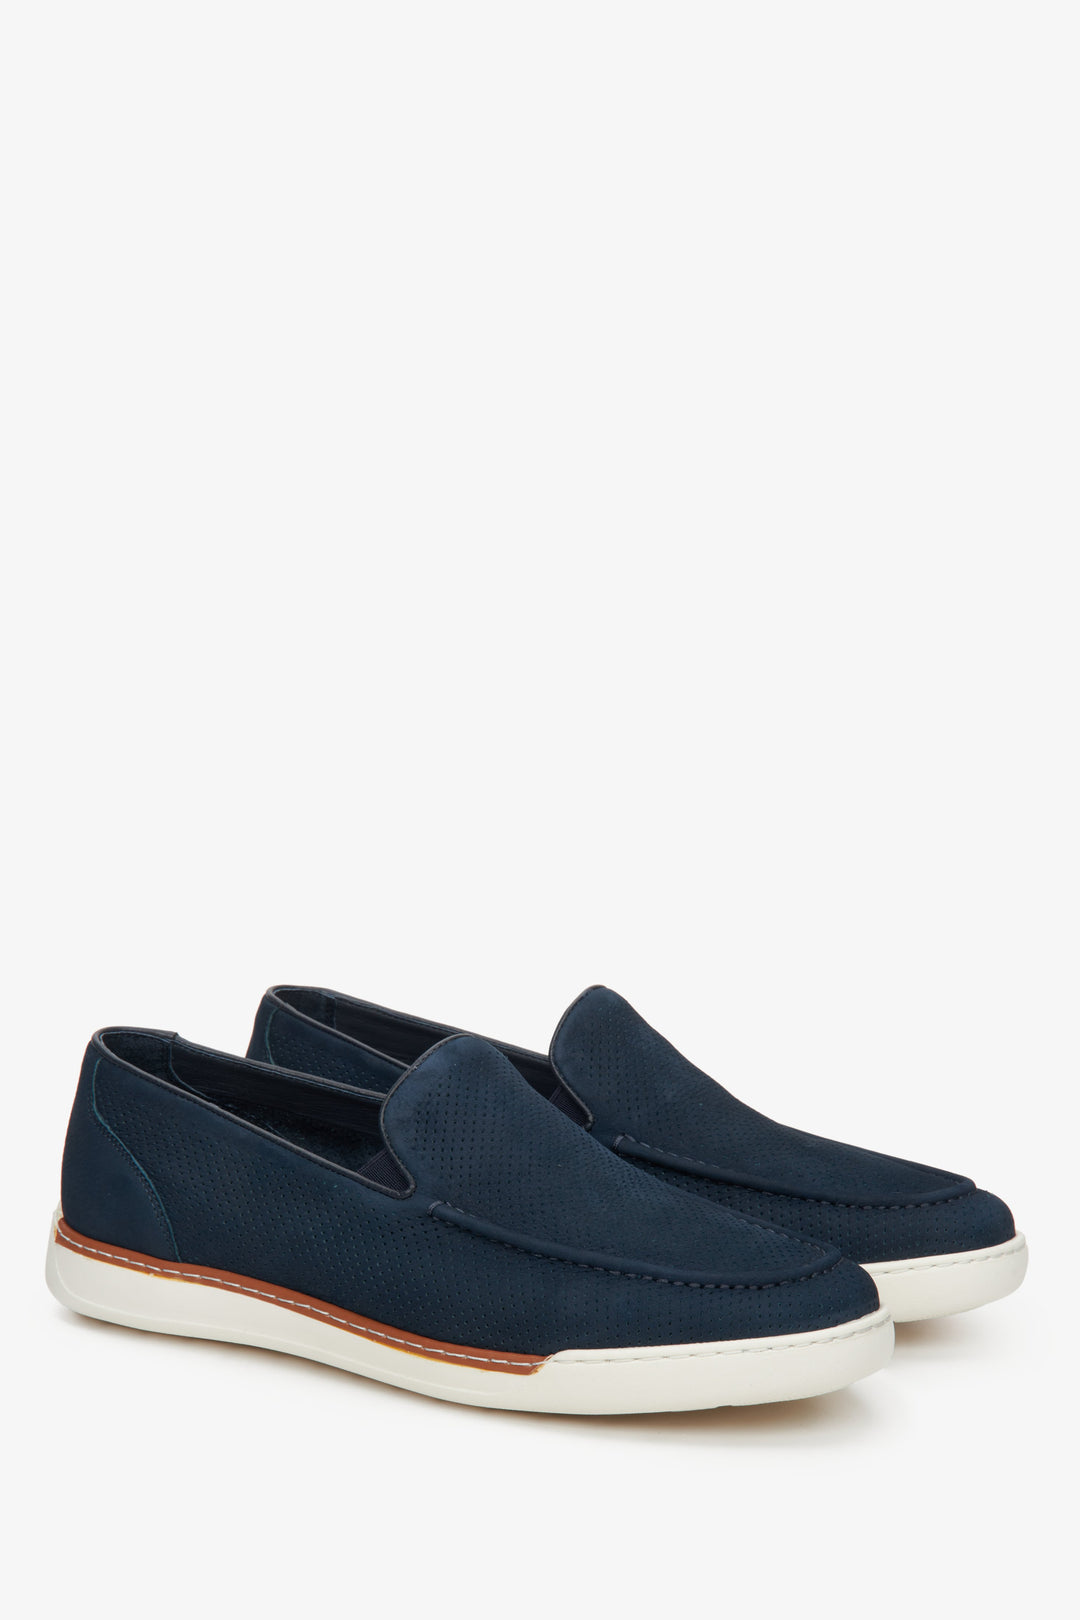 Navy blue men's nubuck moccasins with perforation for fall/spring - presentation of the toe and side seam of the shoes.